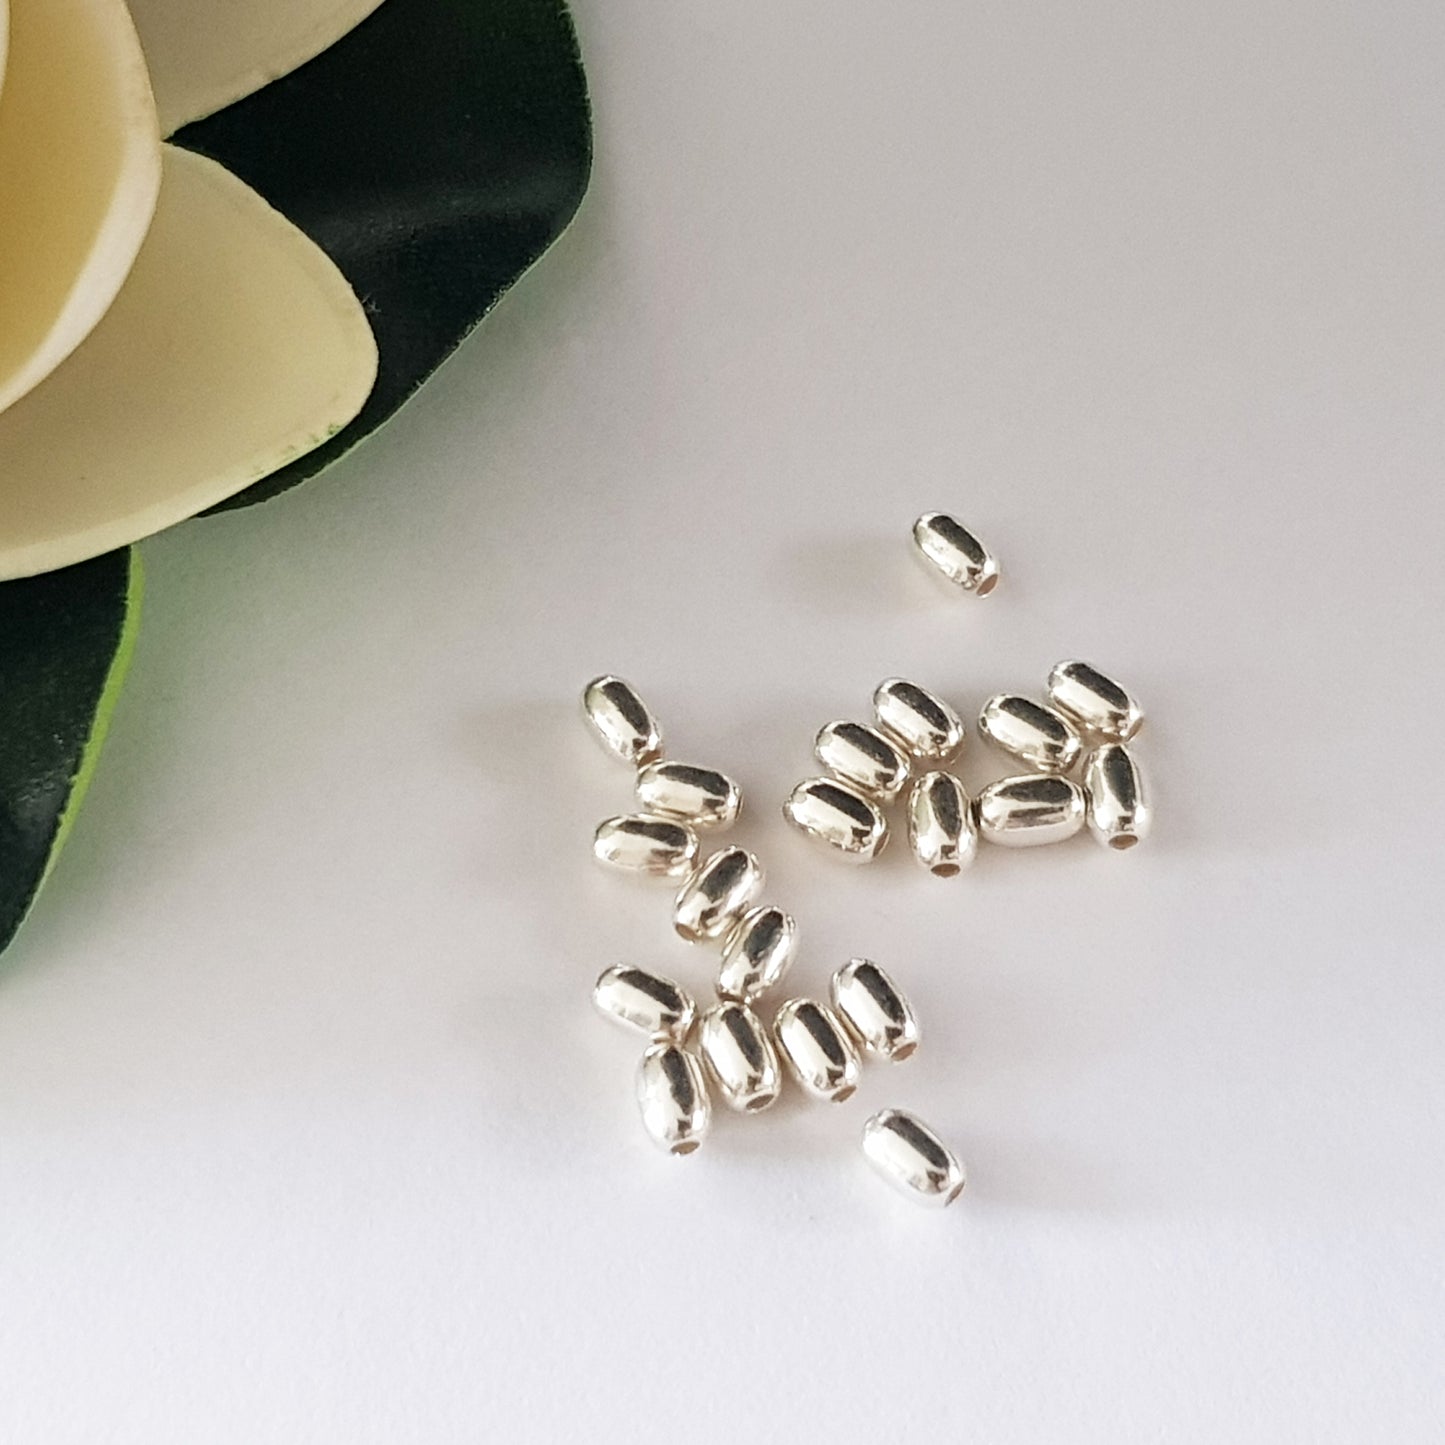 Genuine Sterling Silver Findings - 925 Plain Polished Oval Beads | Precious Metal Findings